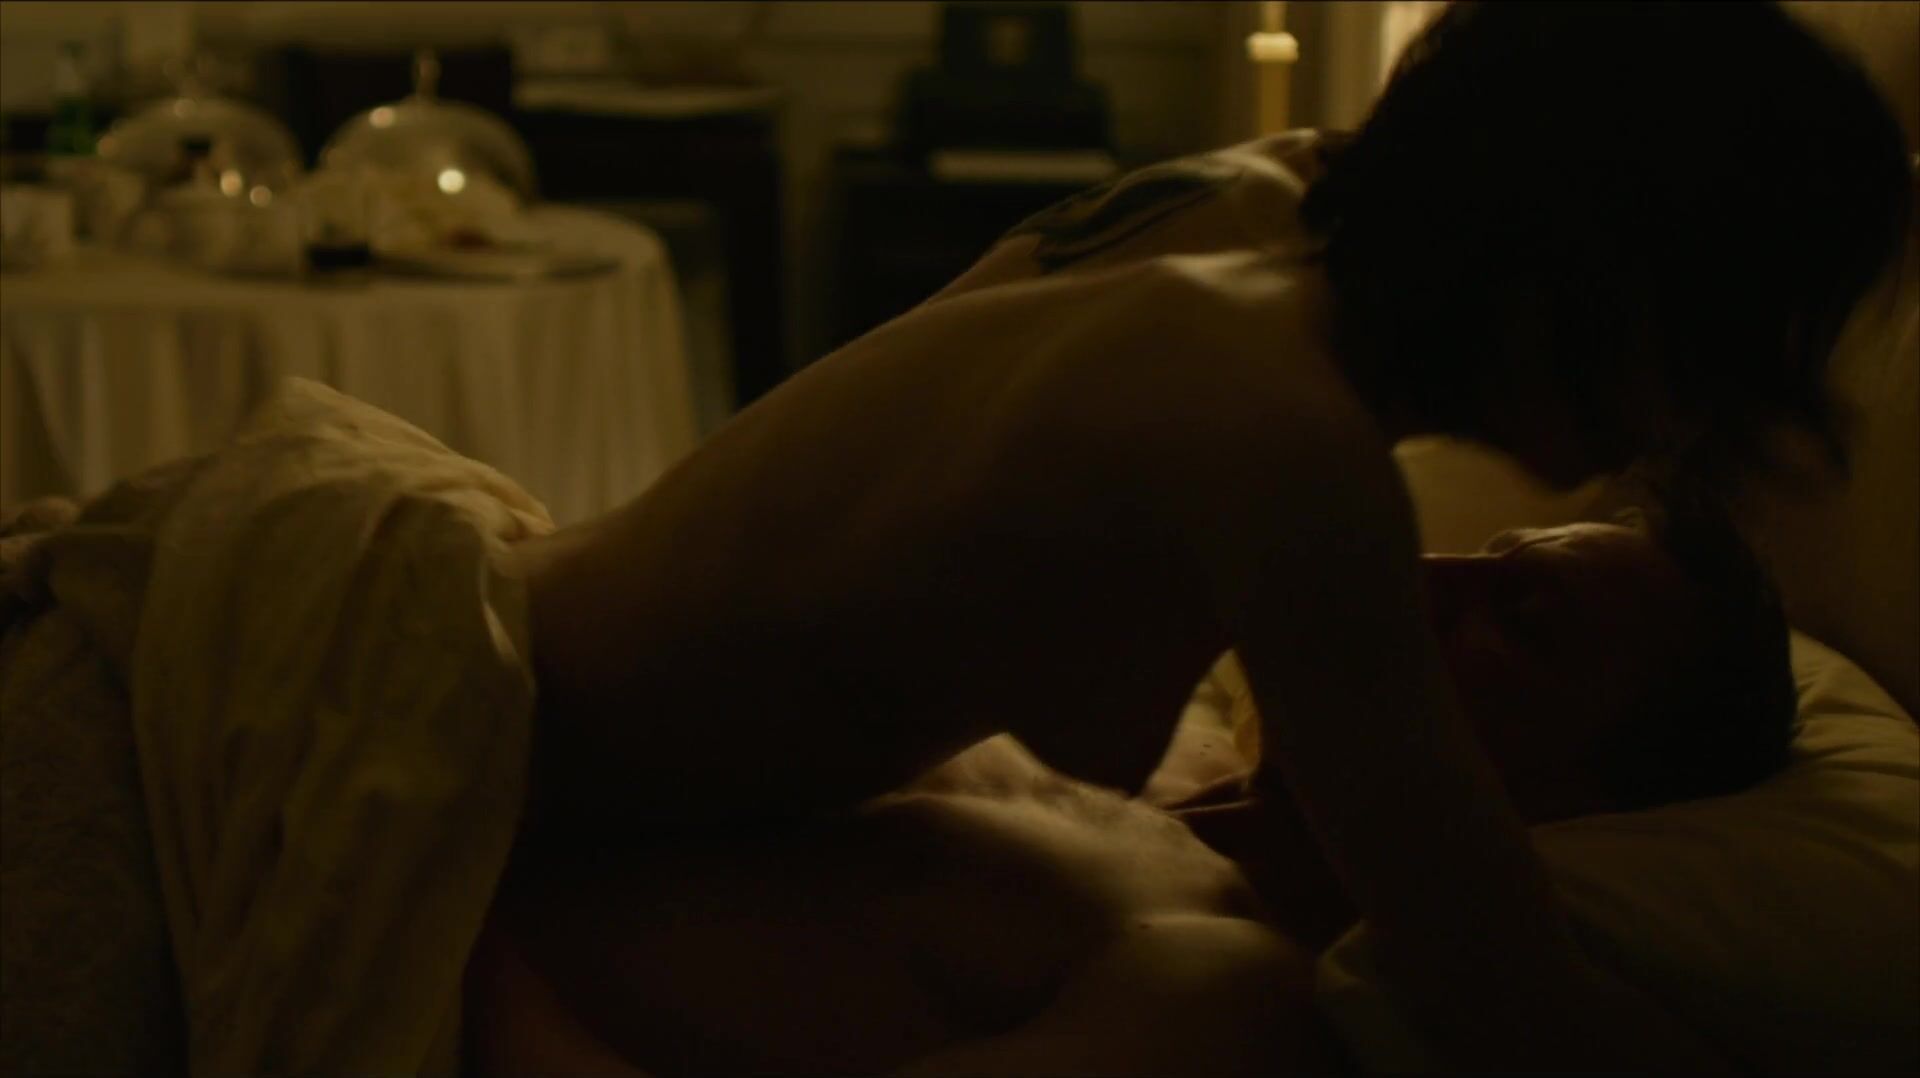 Phun Men hump Rooney Mara with her consent or without it in Girl With The Dragon Tattoo Amatures Gone Wild